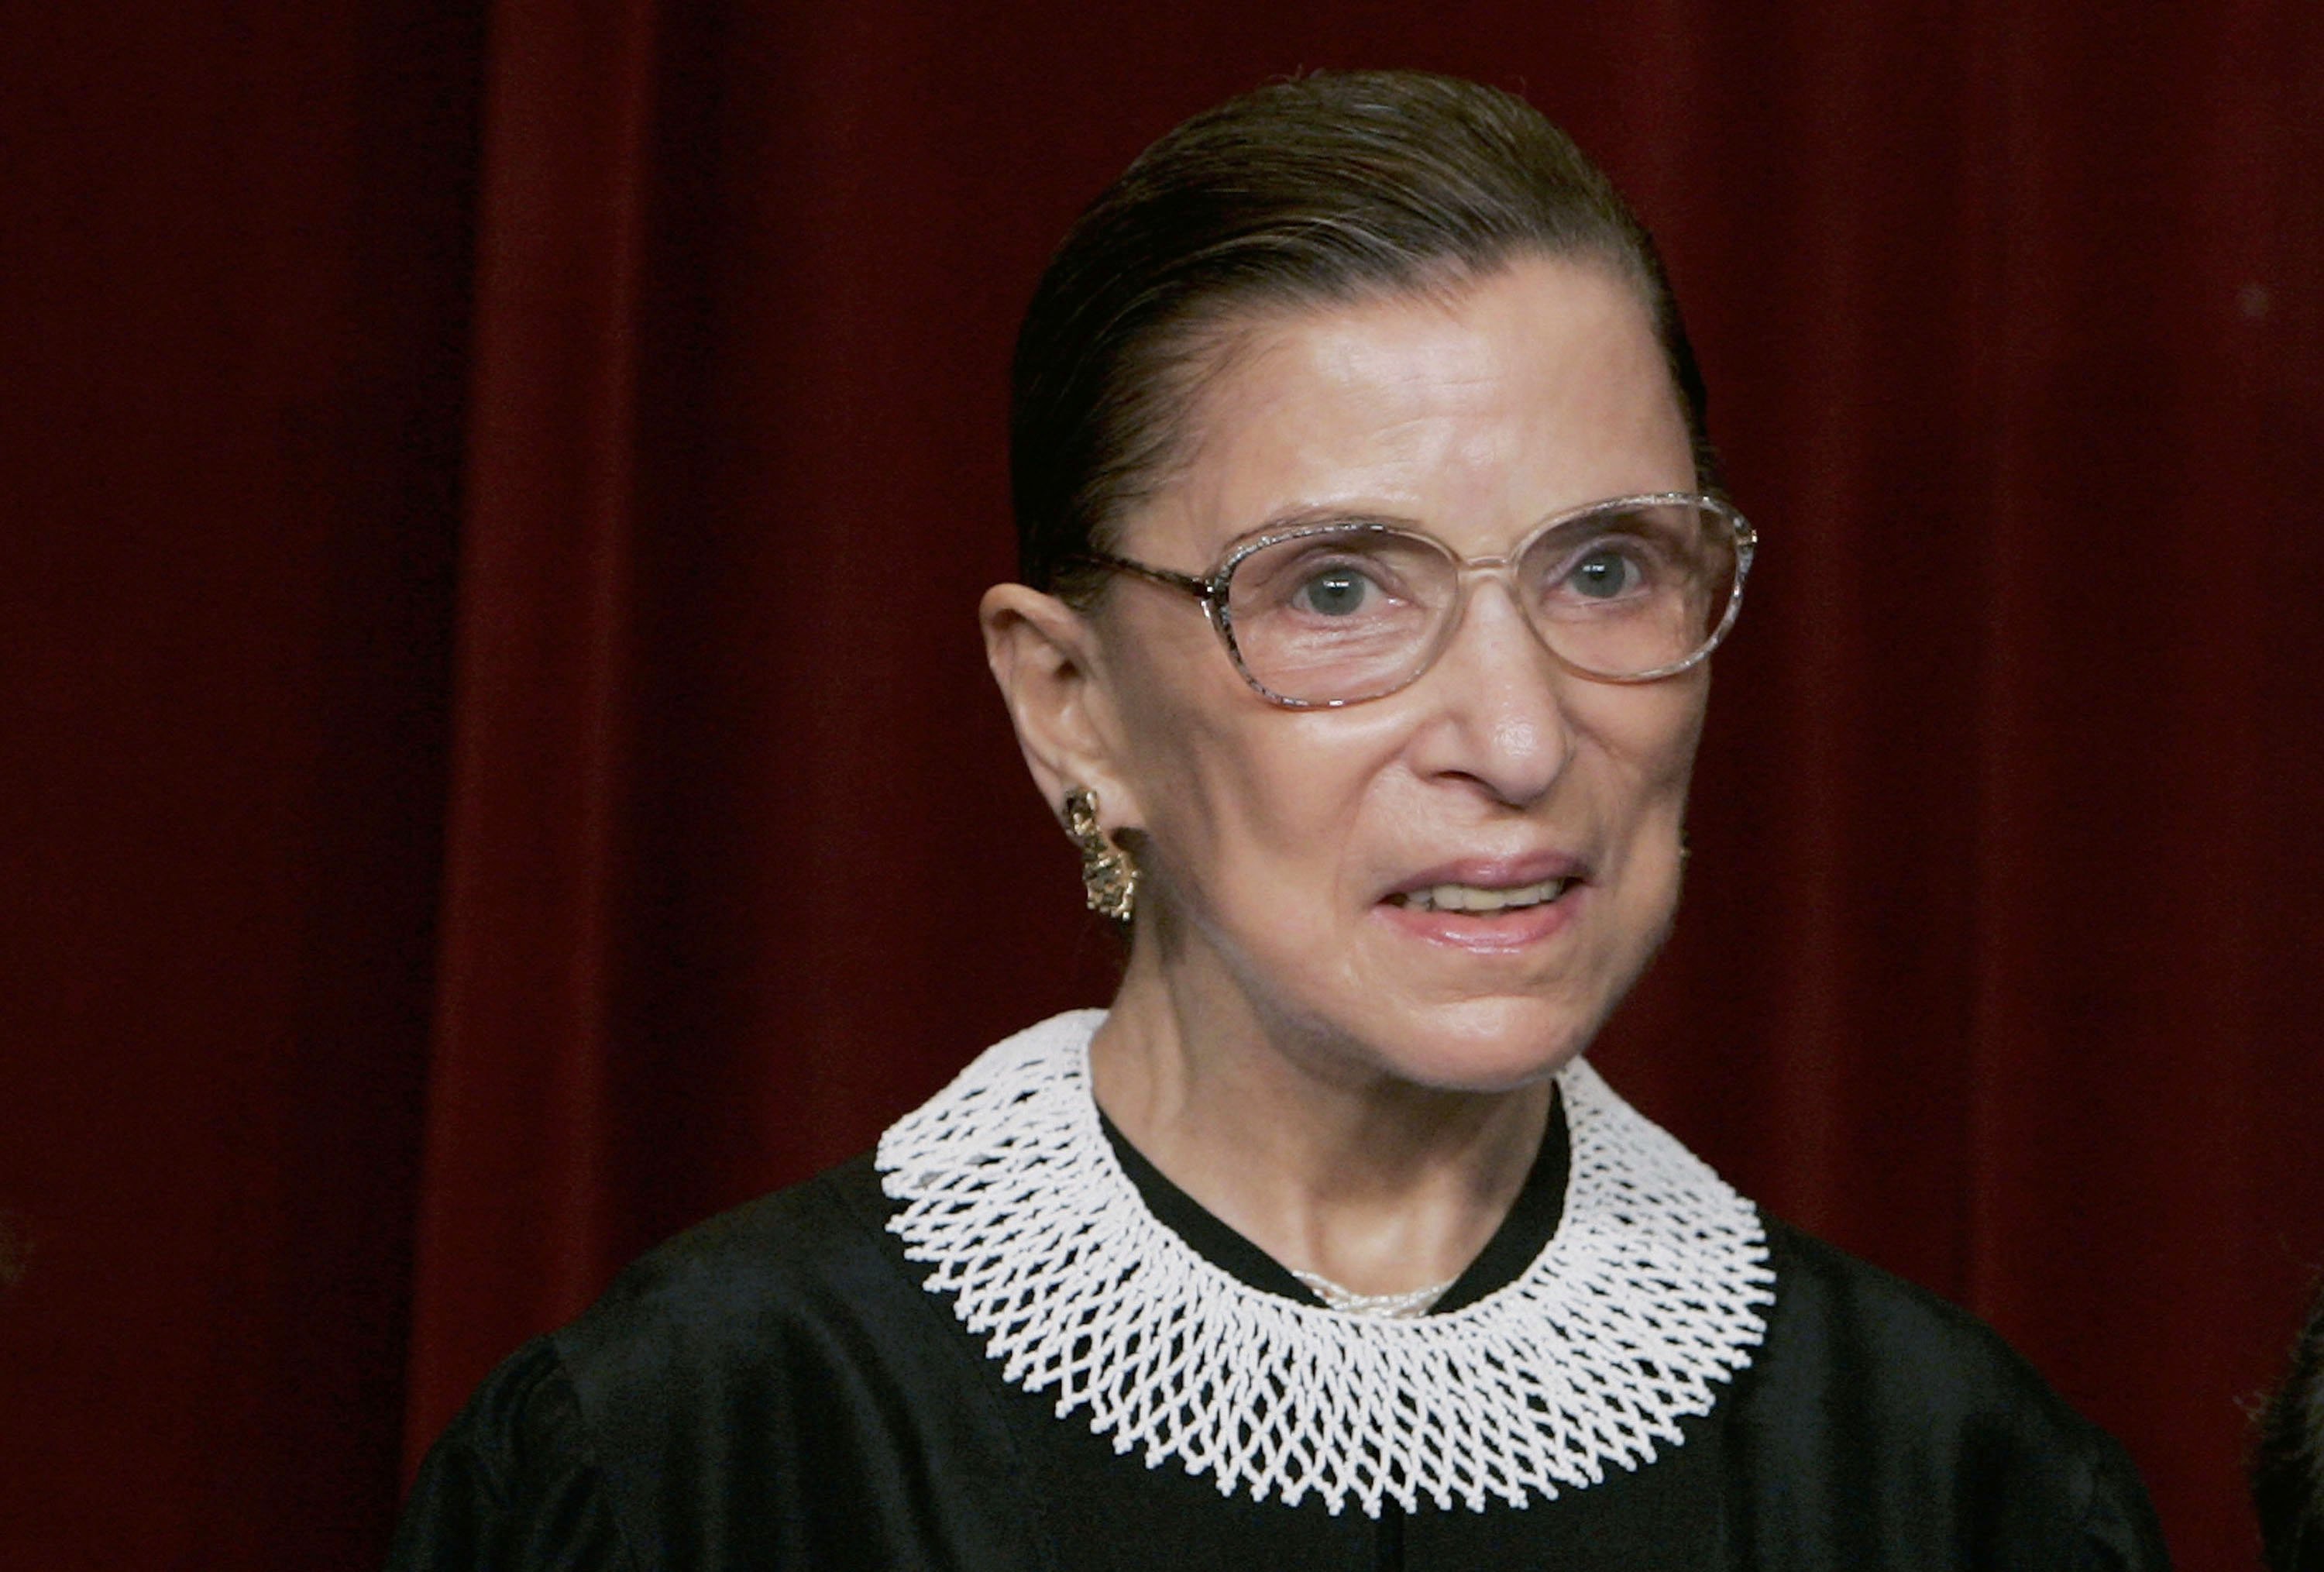 Supreme Court Justice Ruth Bader Ginsburg at a photo session with photographers at the U.S. Supreme Court March 3, 2006 in Washington DC | Photo: Getty Images